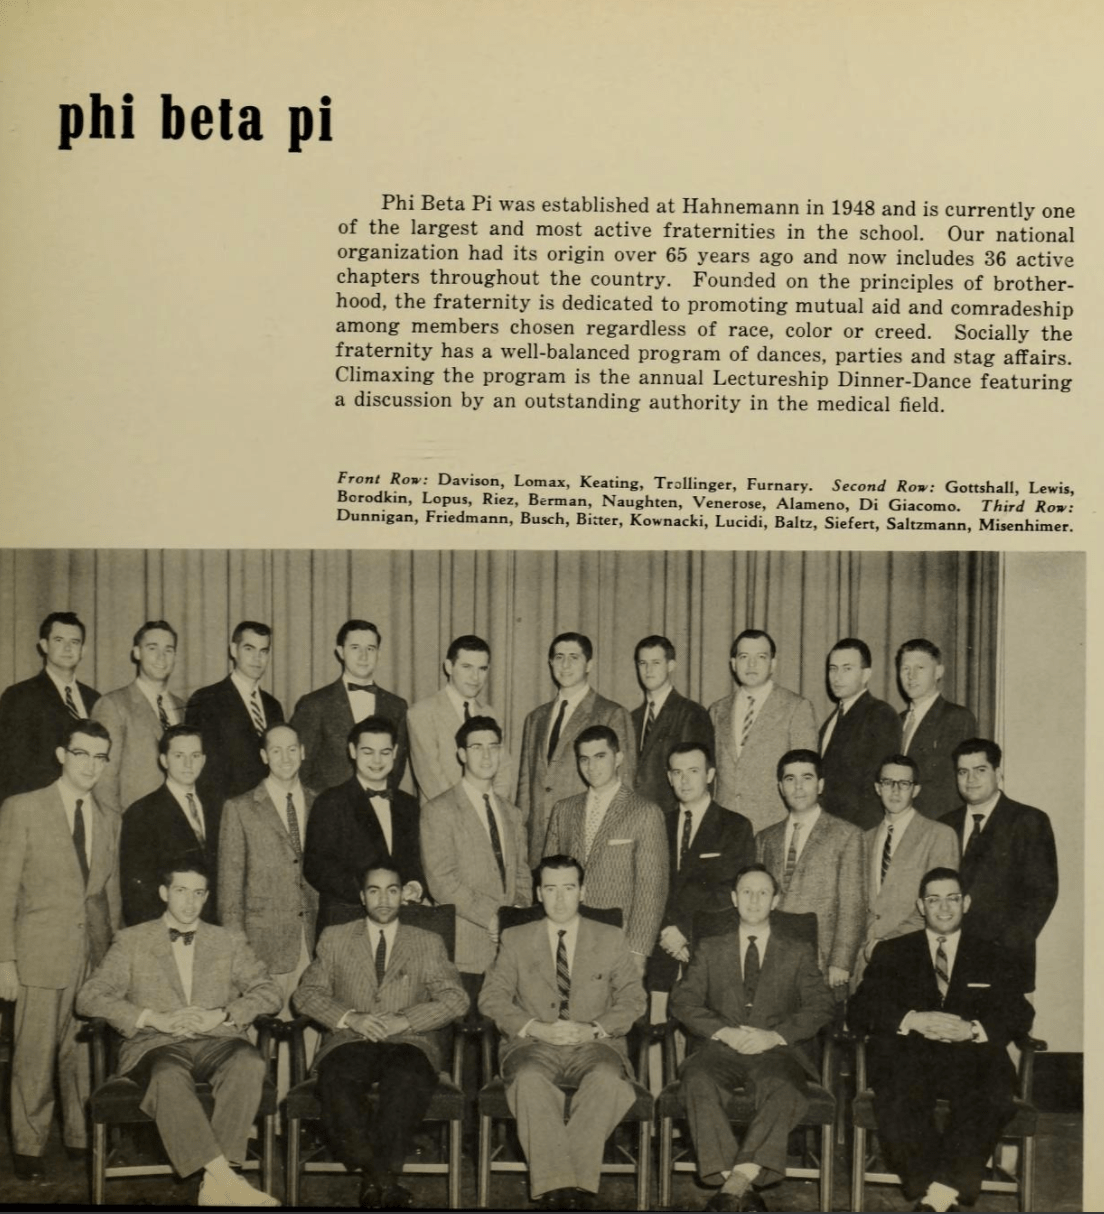 A scan from the 1957 Hahnemann yearbook for the Phi Beta Pi fraternity that Walter P. Lomax Jr, second from left in the front row in photo, joined.